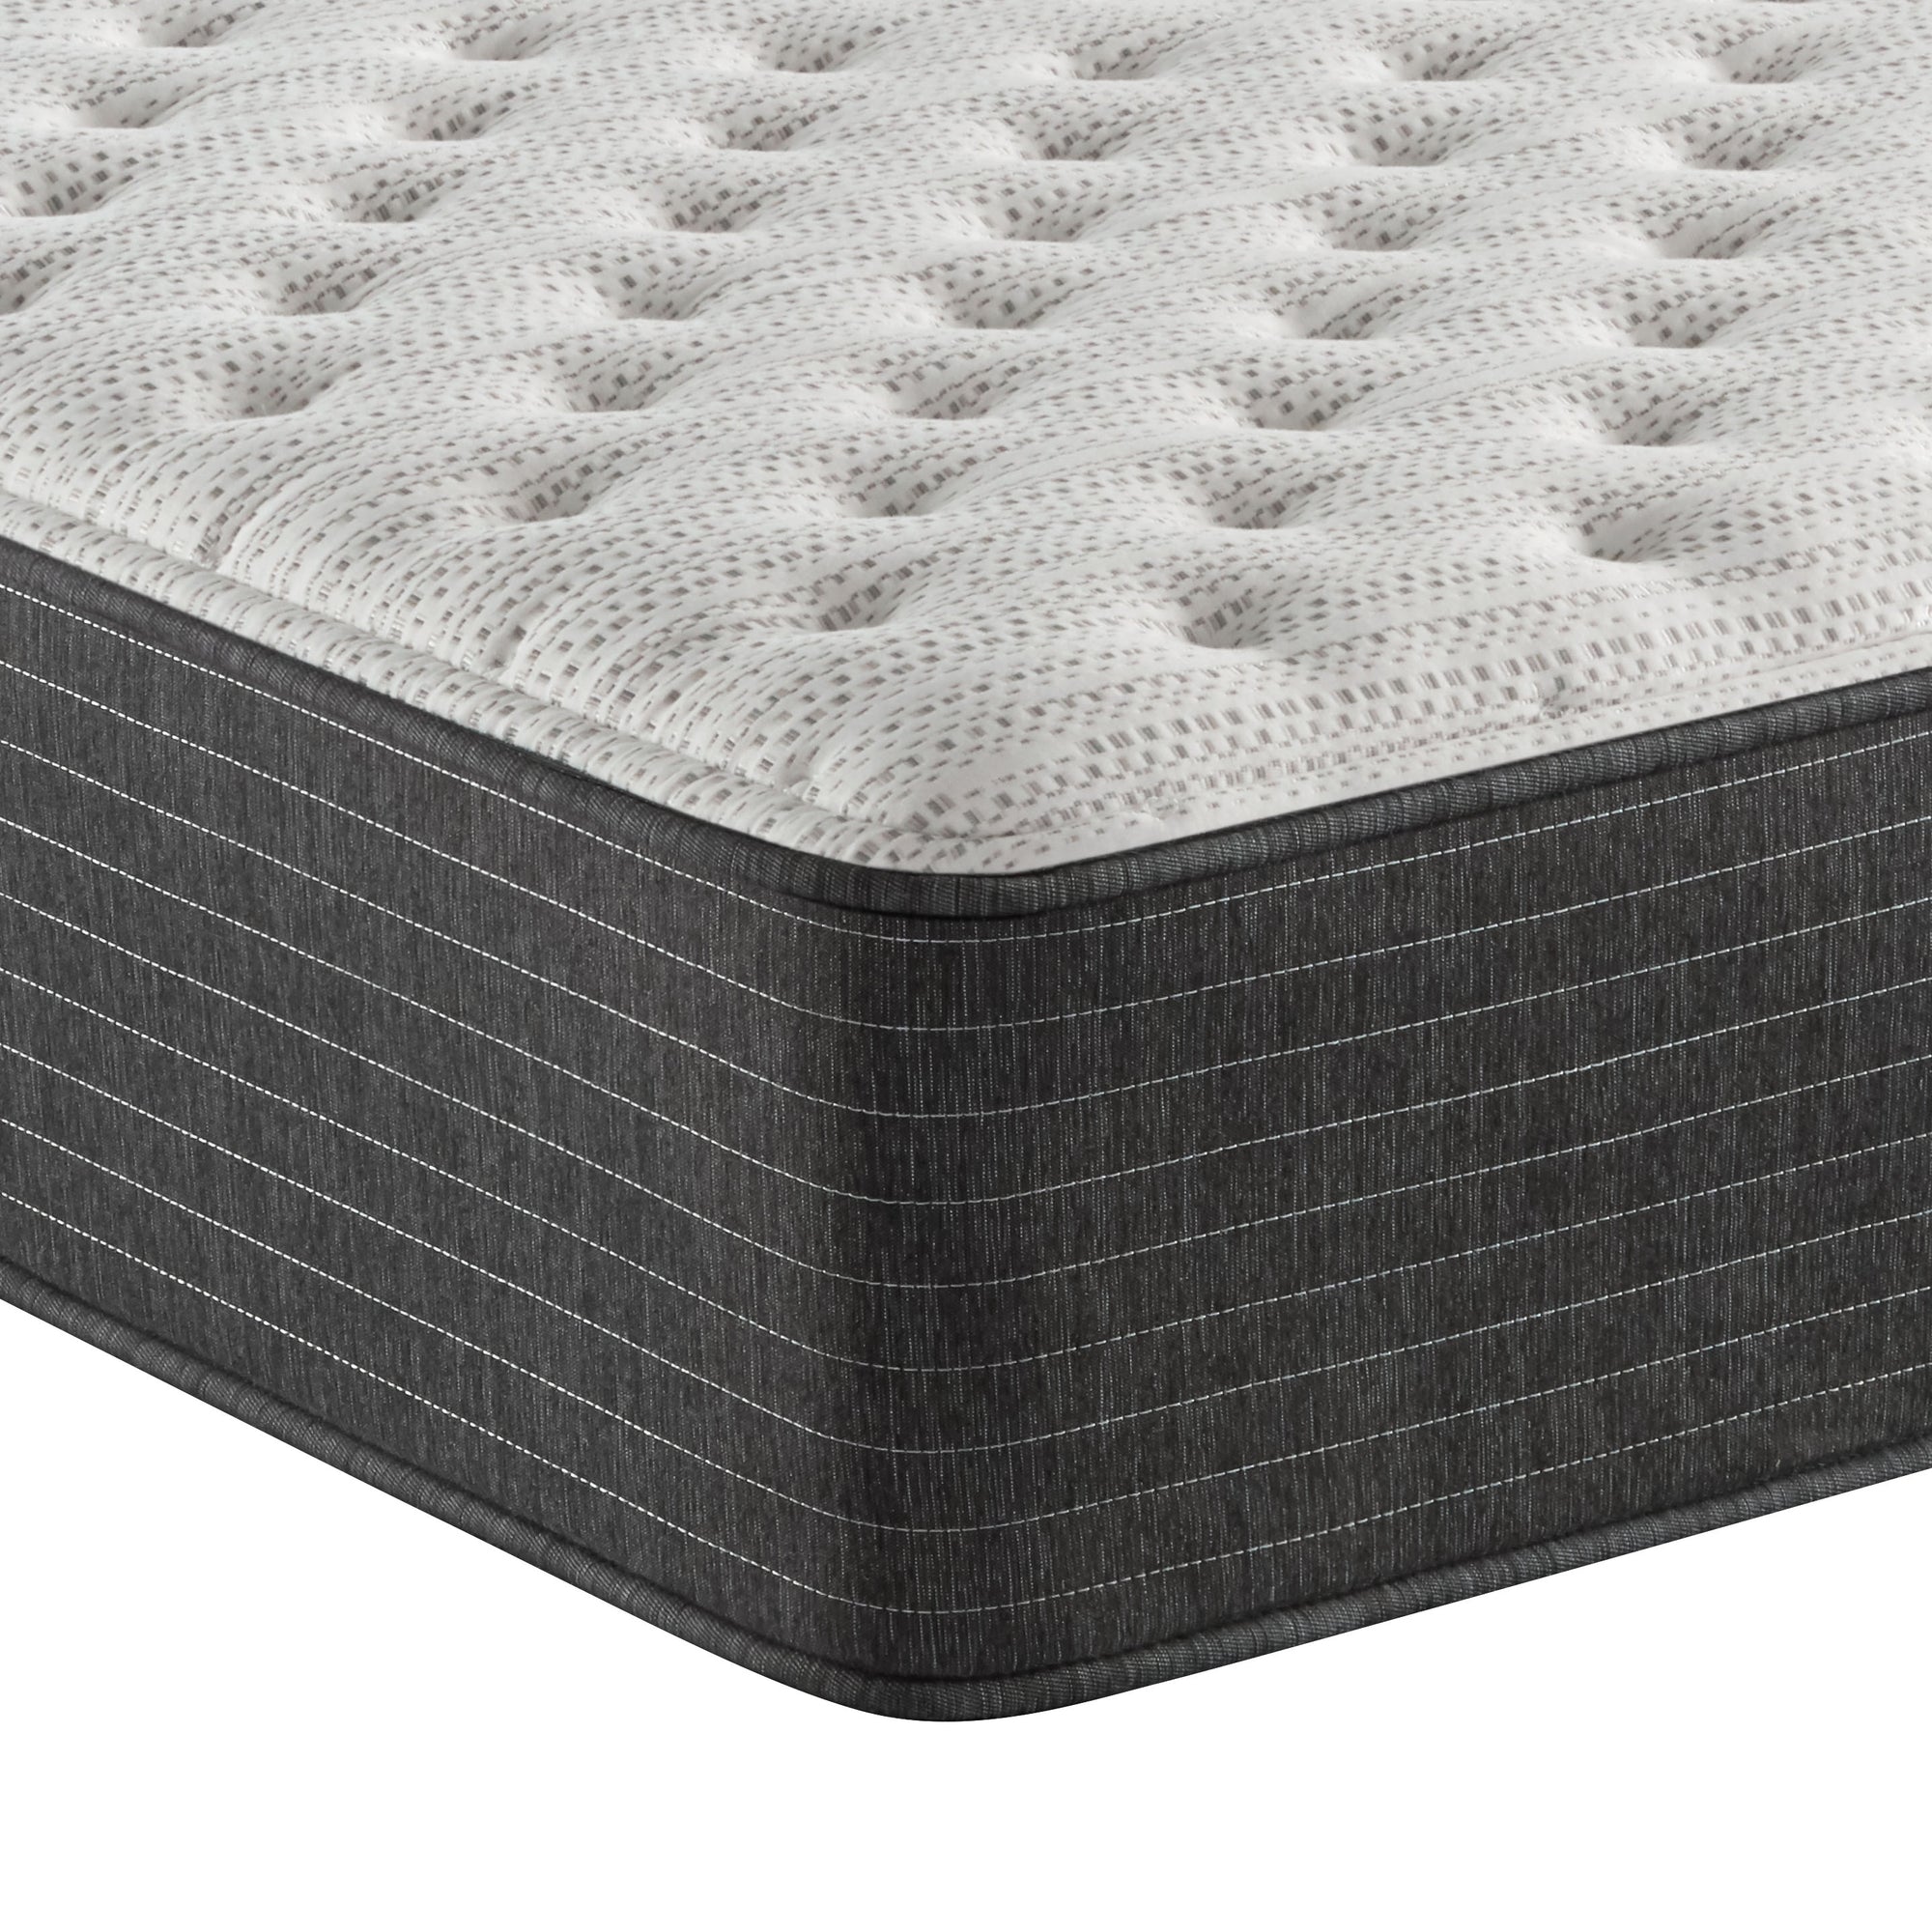 Corner view of the Beautyrest Silver BRS900 Extra Firm mattress